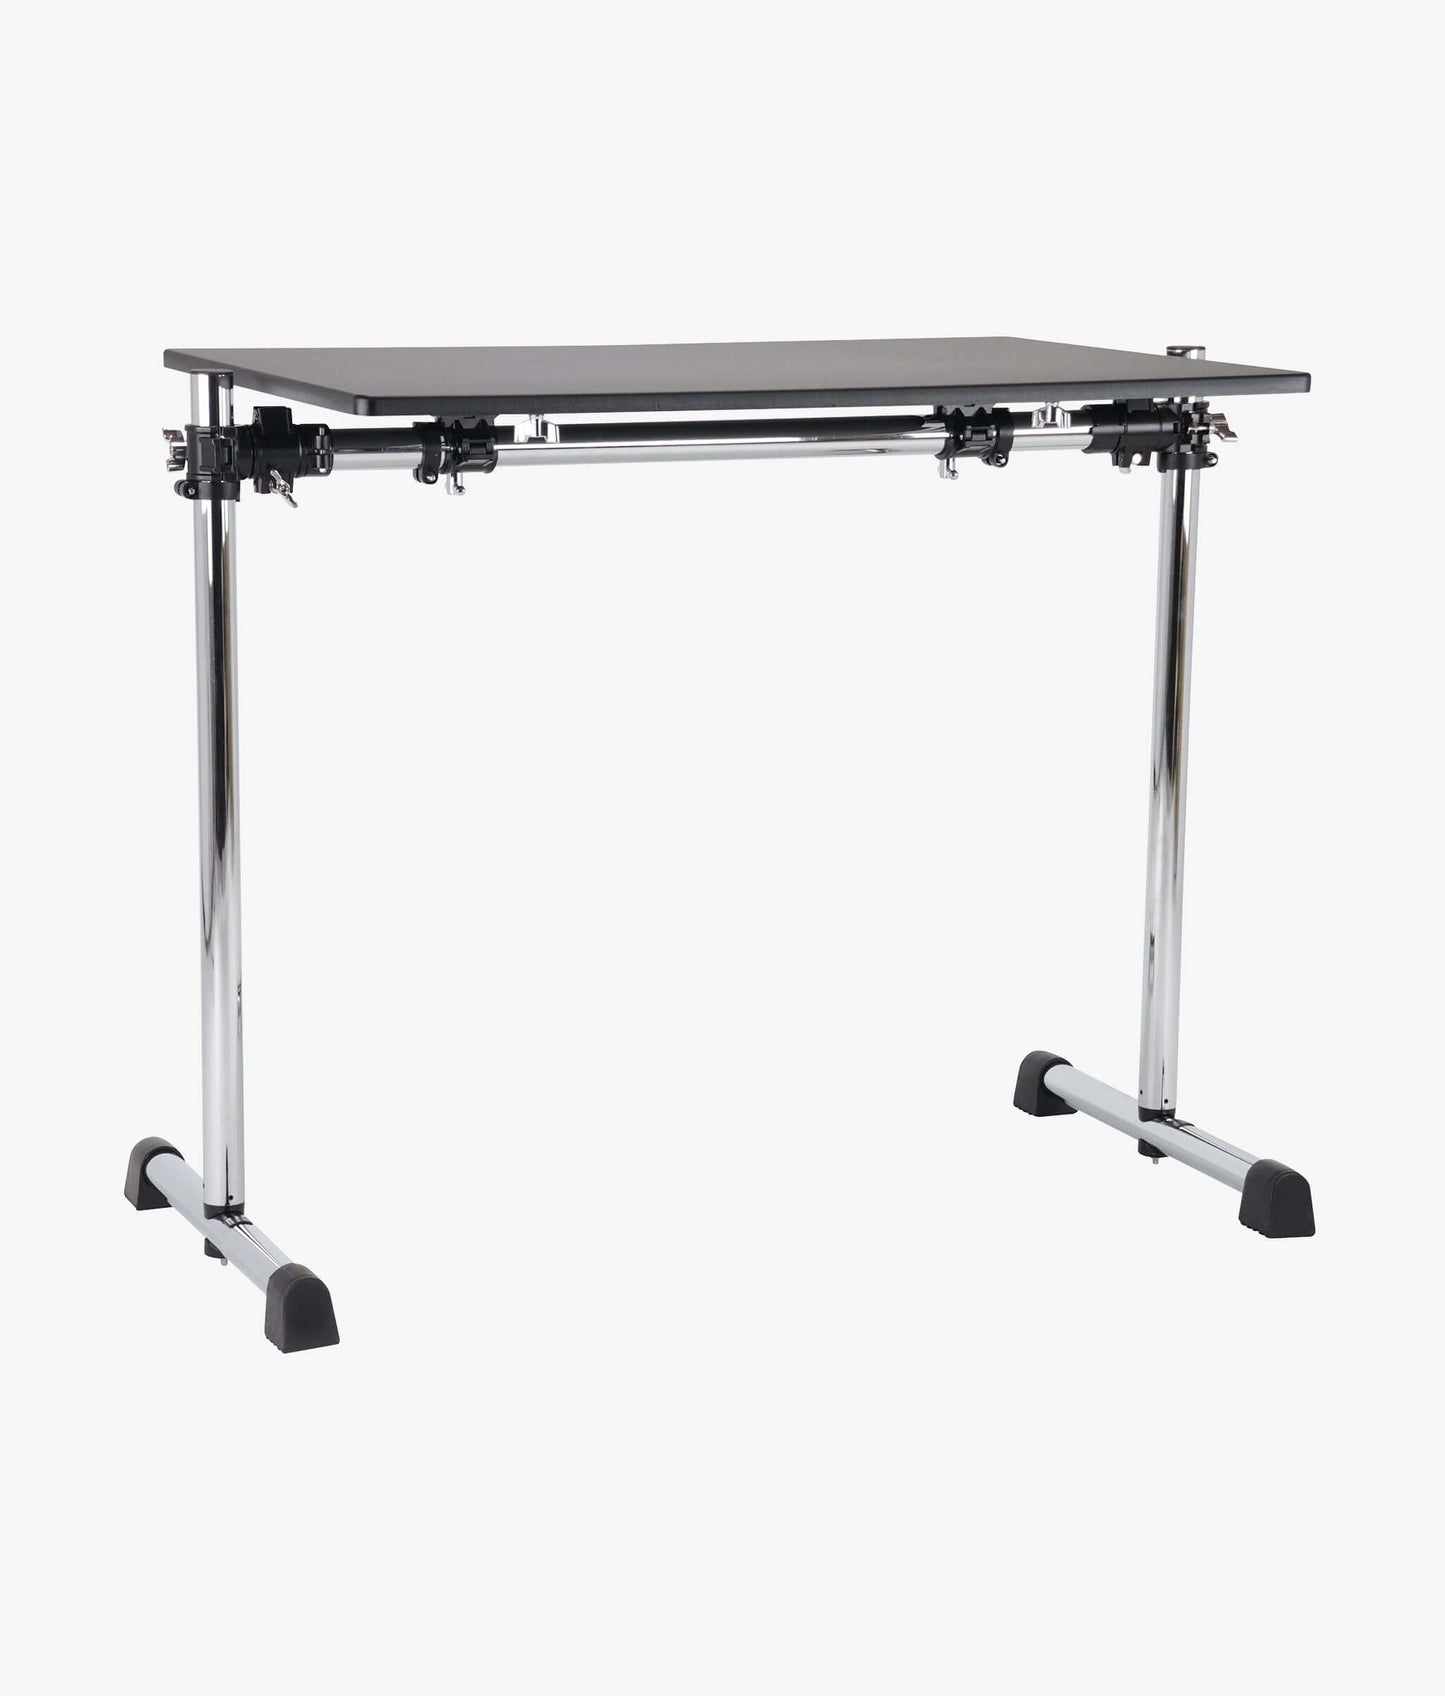 Gibraltar RKWST Rack Workstation with Mounted Table and Mounting Hardware